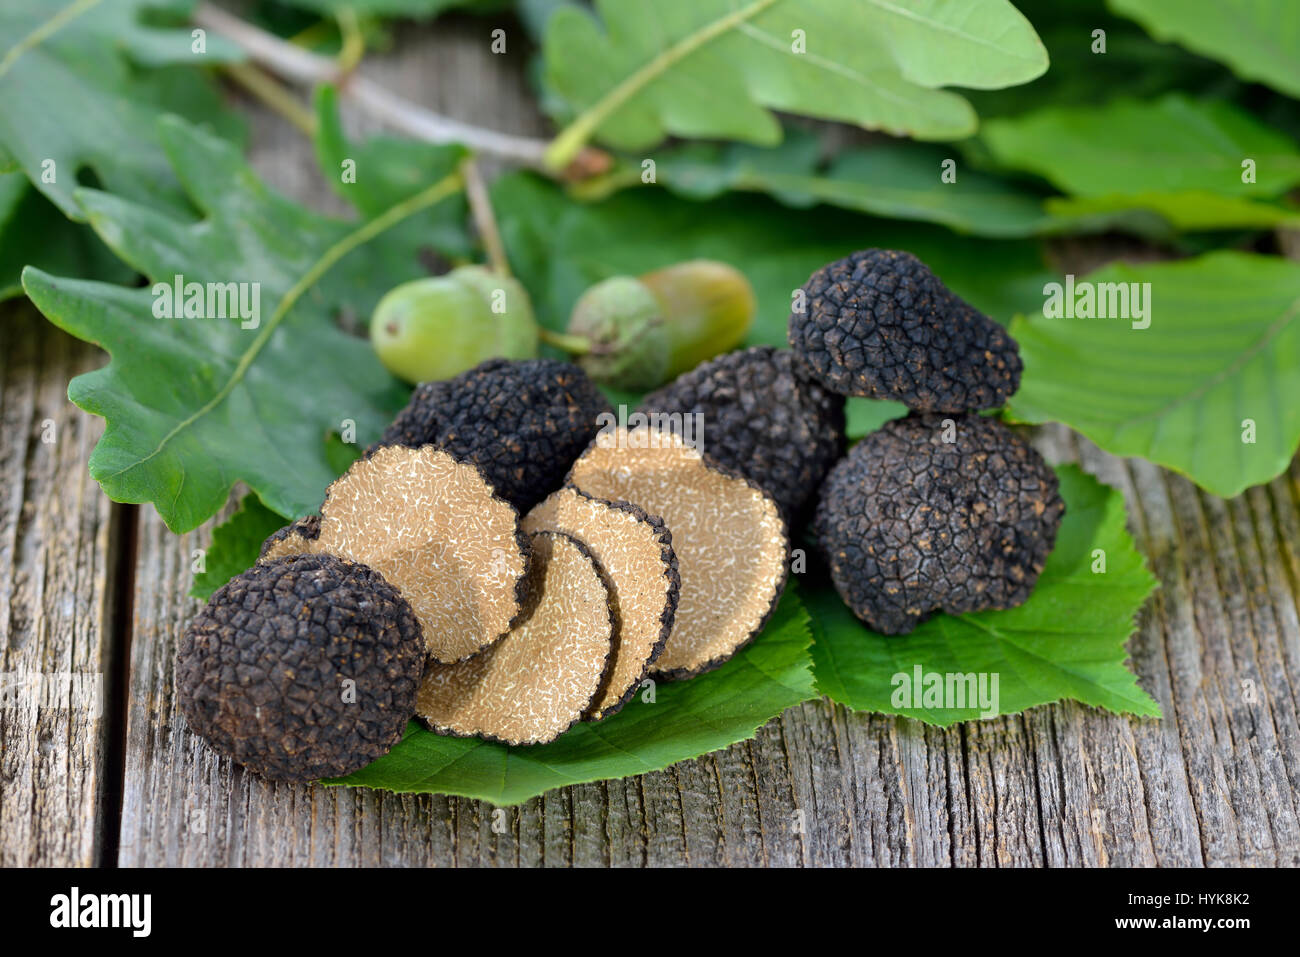 Black autumn truffles from France on leaves Stock Photo